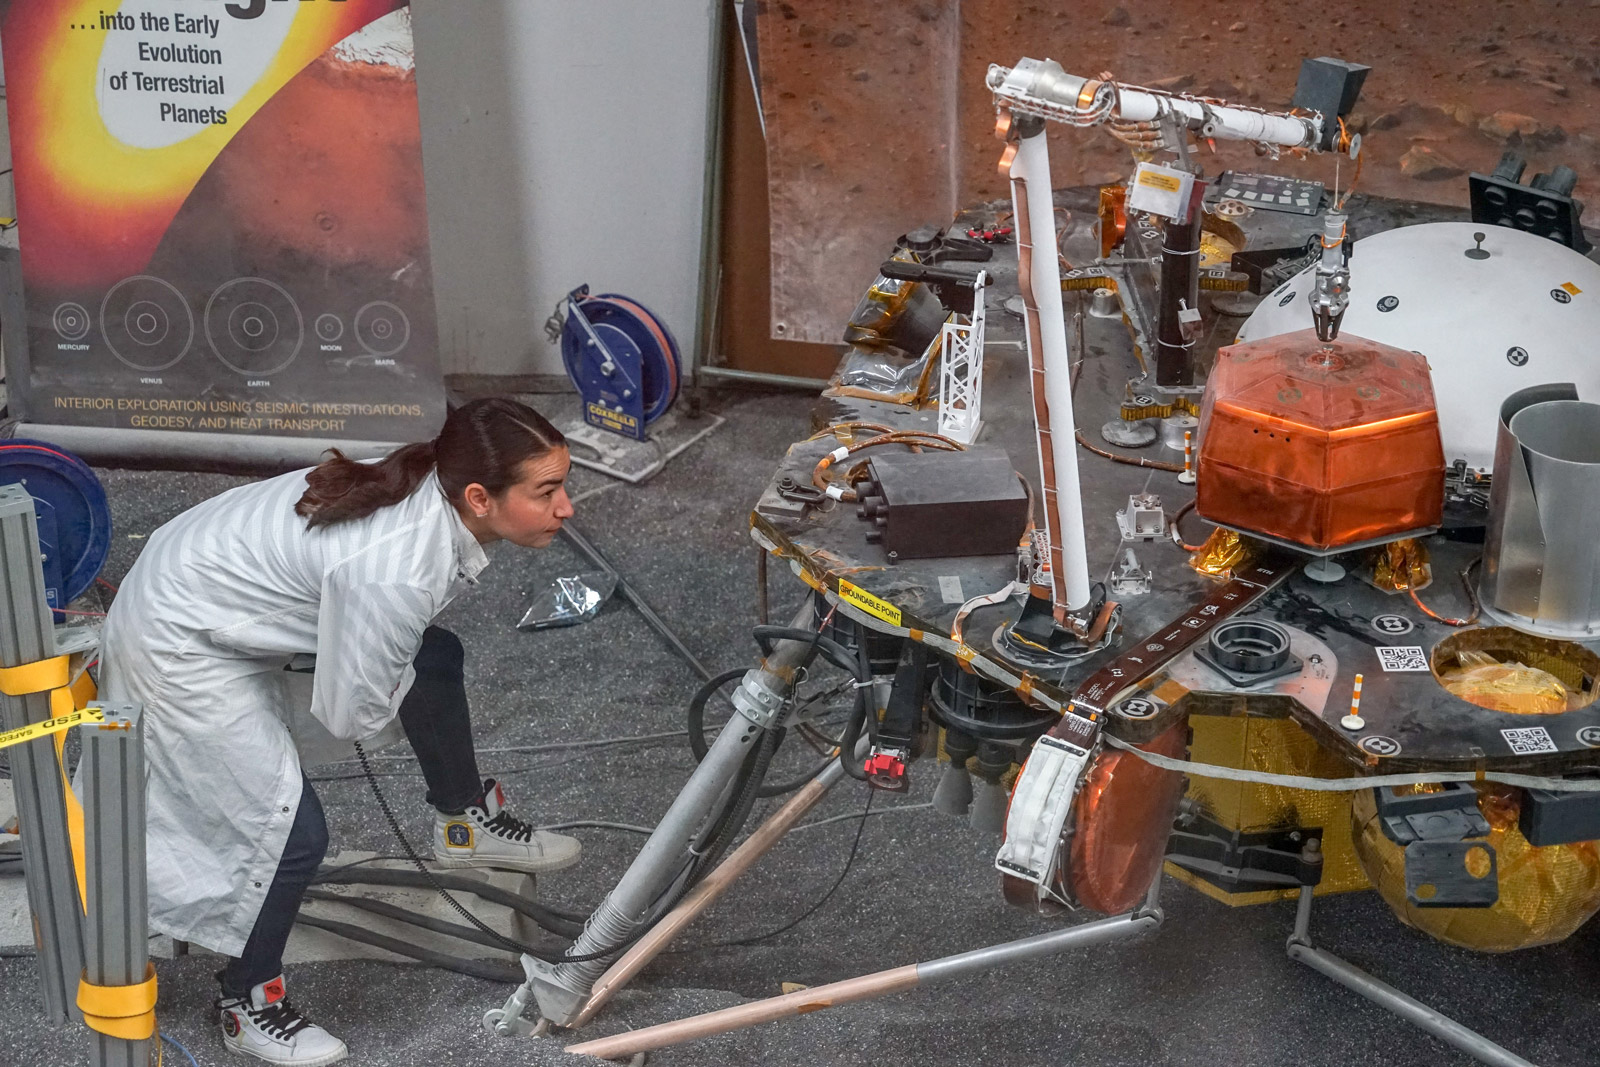 Engineer Marleen Sundgaard watches as the robotic arm on a test version of NASA's Mars InSight lander grasps a model of the spacecraft's seismometer. This work was done at NASA's Jet Propulsion Laboratory in Pasadena, California.